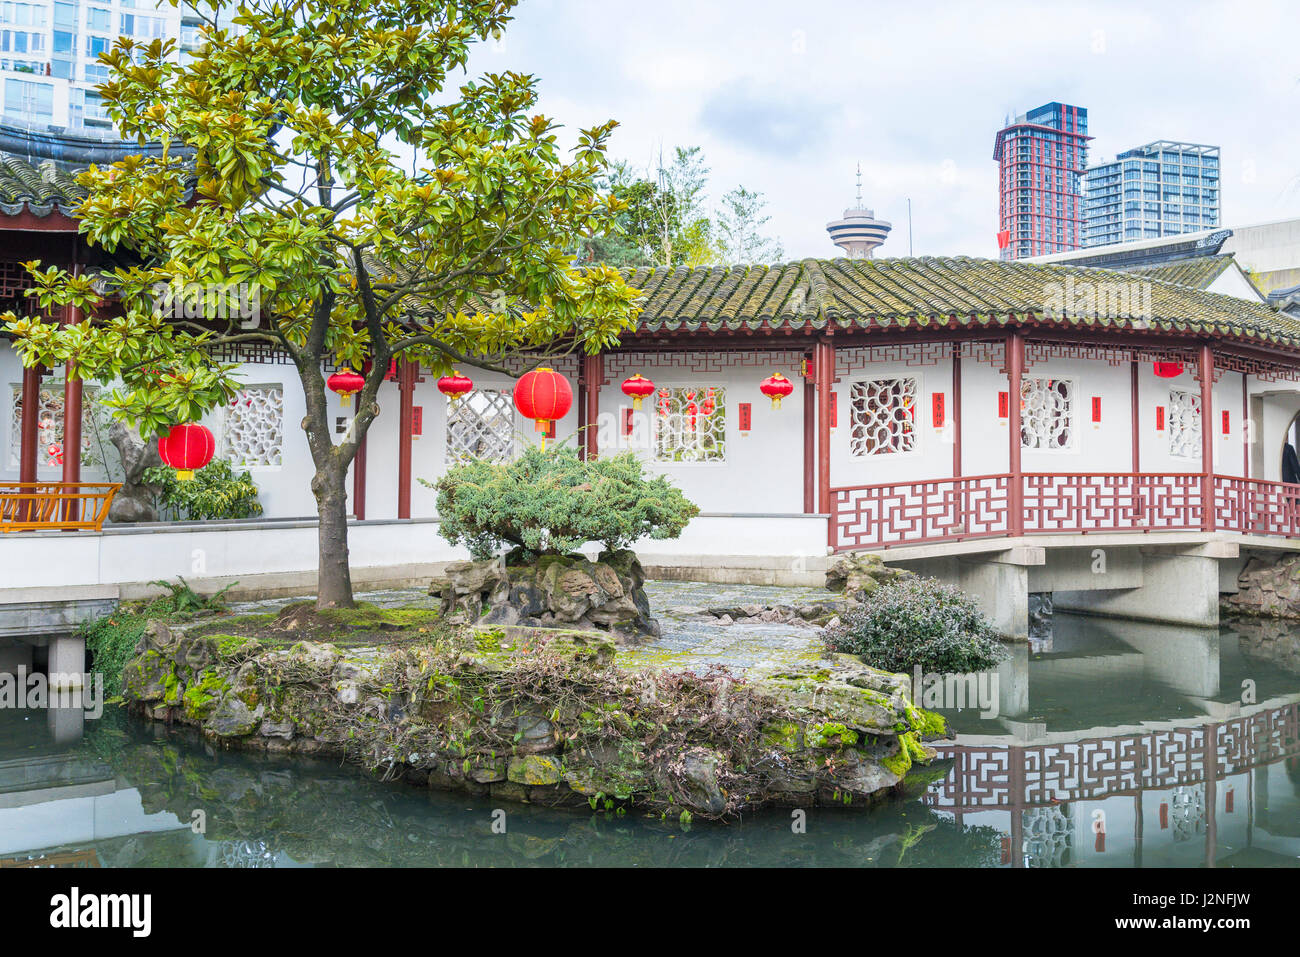 Pagoda and pond, Dr Sun Yat Sen Park and Gardens, Chinatown, Vancouver, British Columbia, Canada Stock Photo